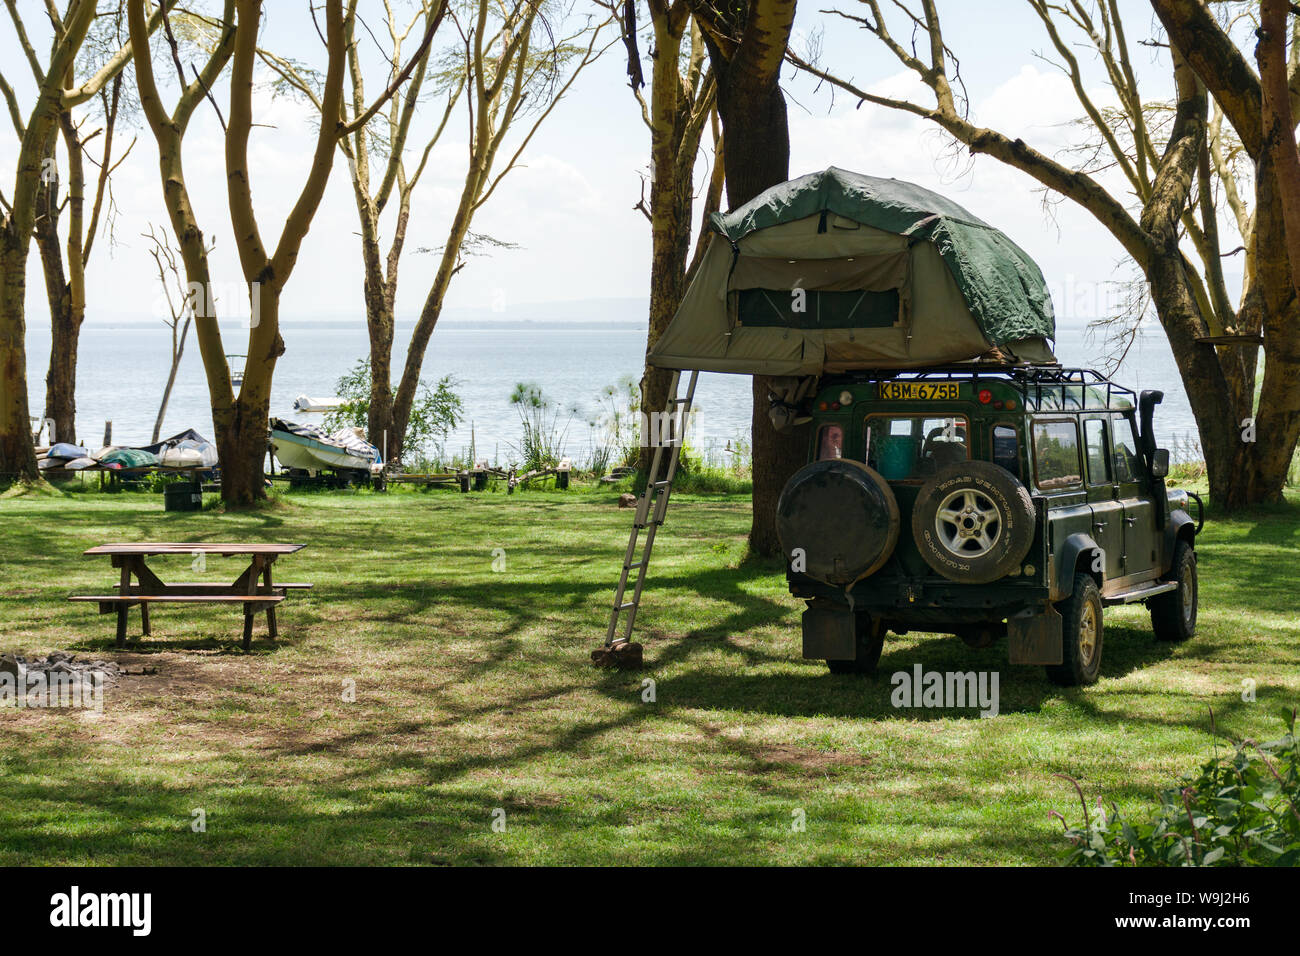 Roof tent on top of Toyota Landcruiser with lake Naivasha in background, Kenya, East Africa Stock Photo